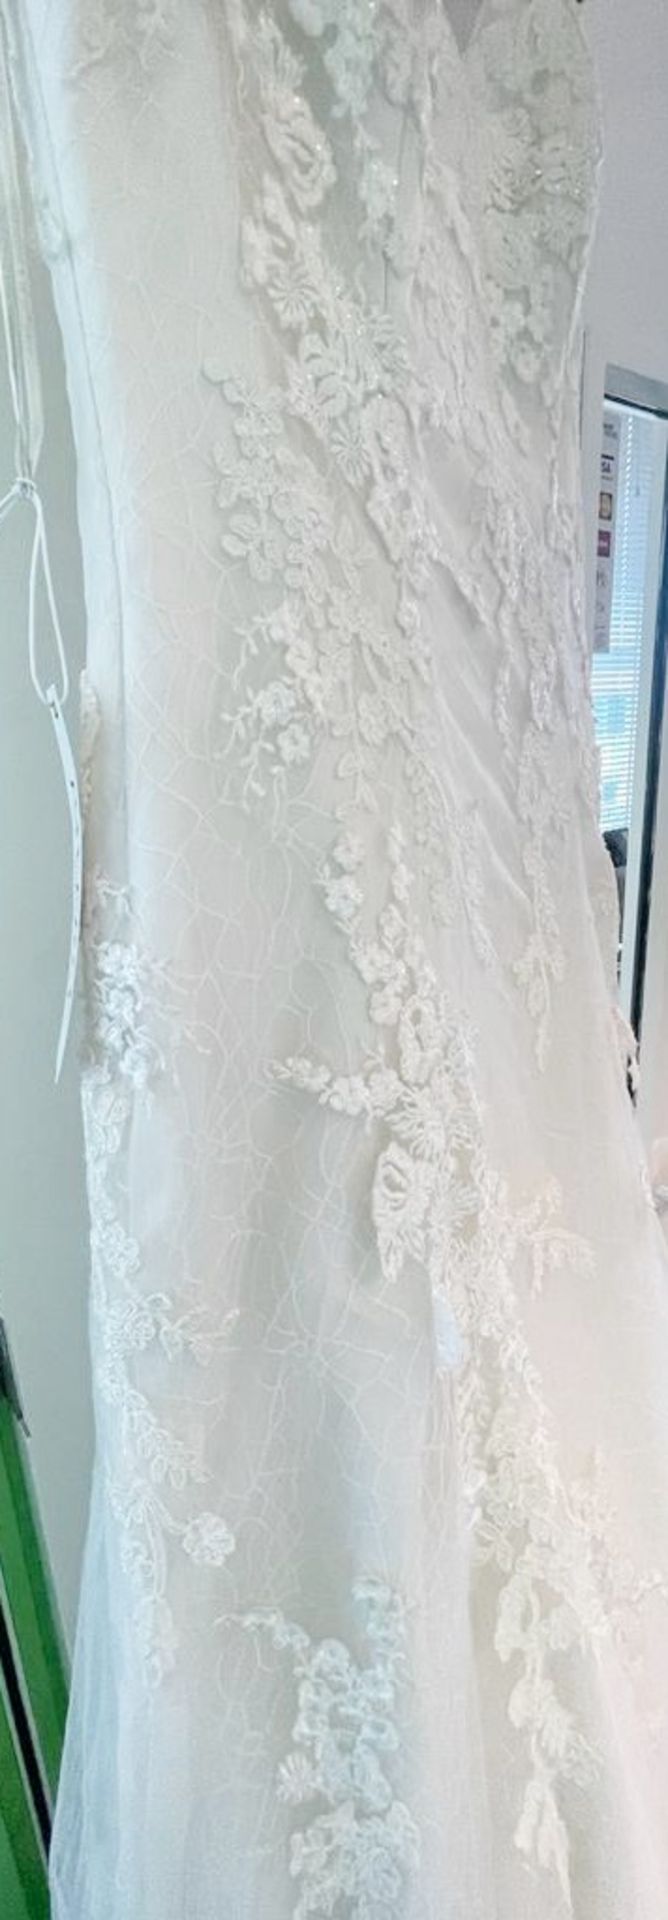 1 x ATELIER LYANA 'Susan' Designer Sweetheart Neckline Wedding Dress Bridal Gown, With Chantily Lace - Image 4 of 10